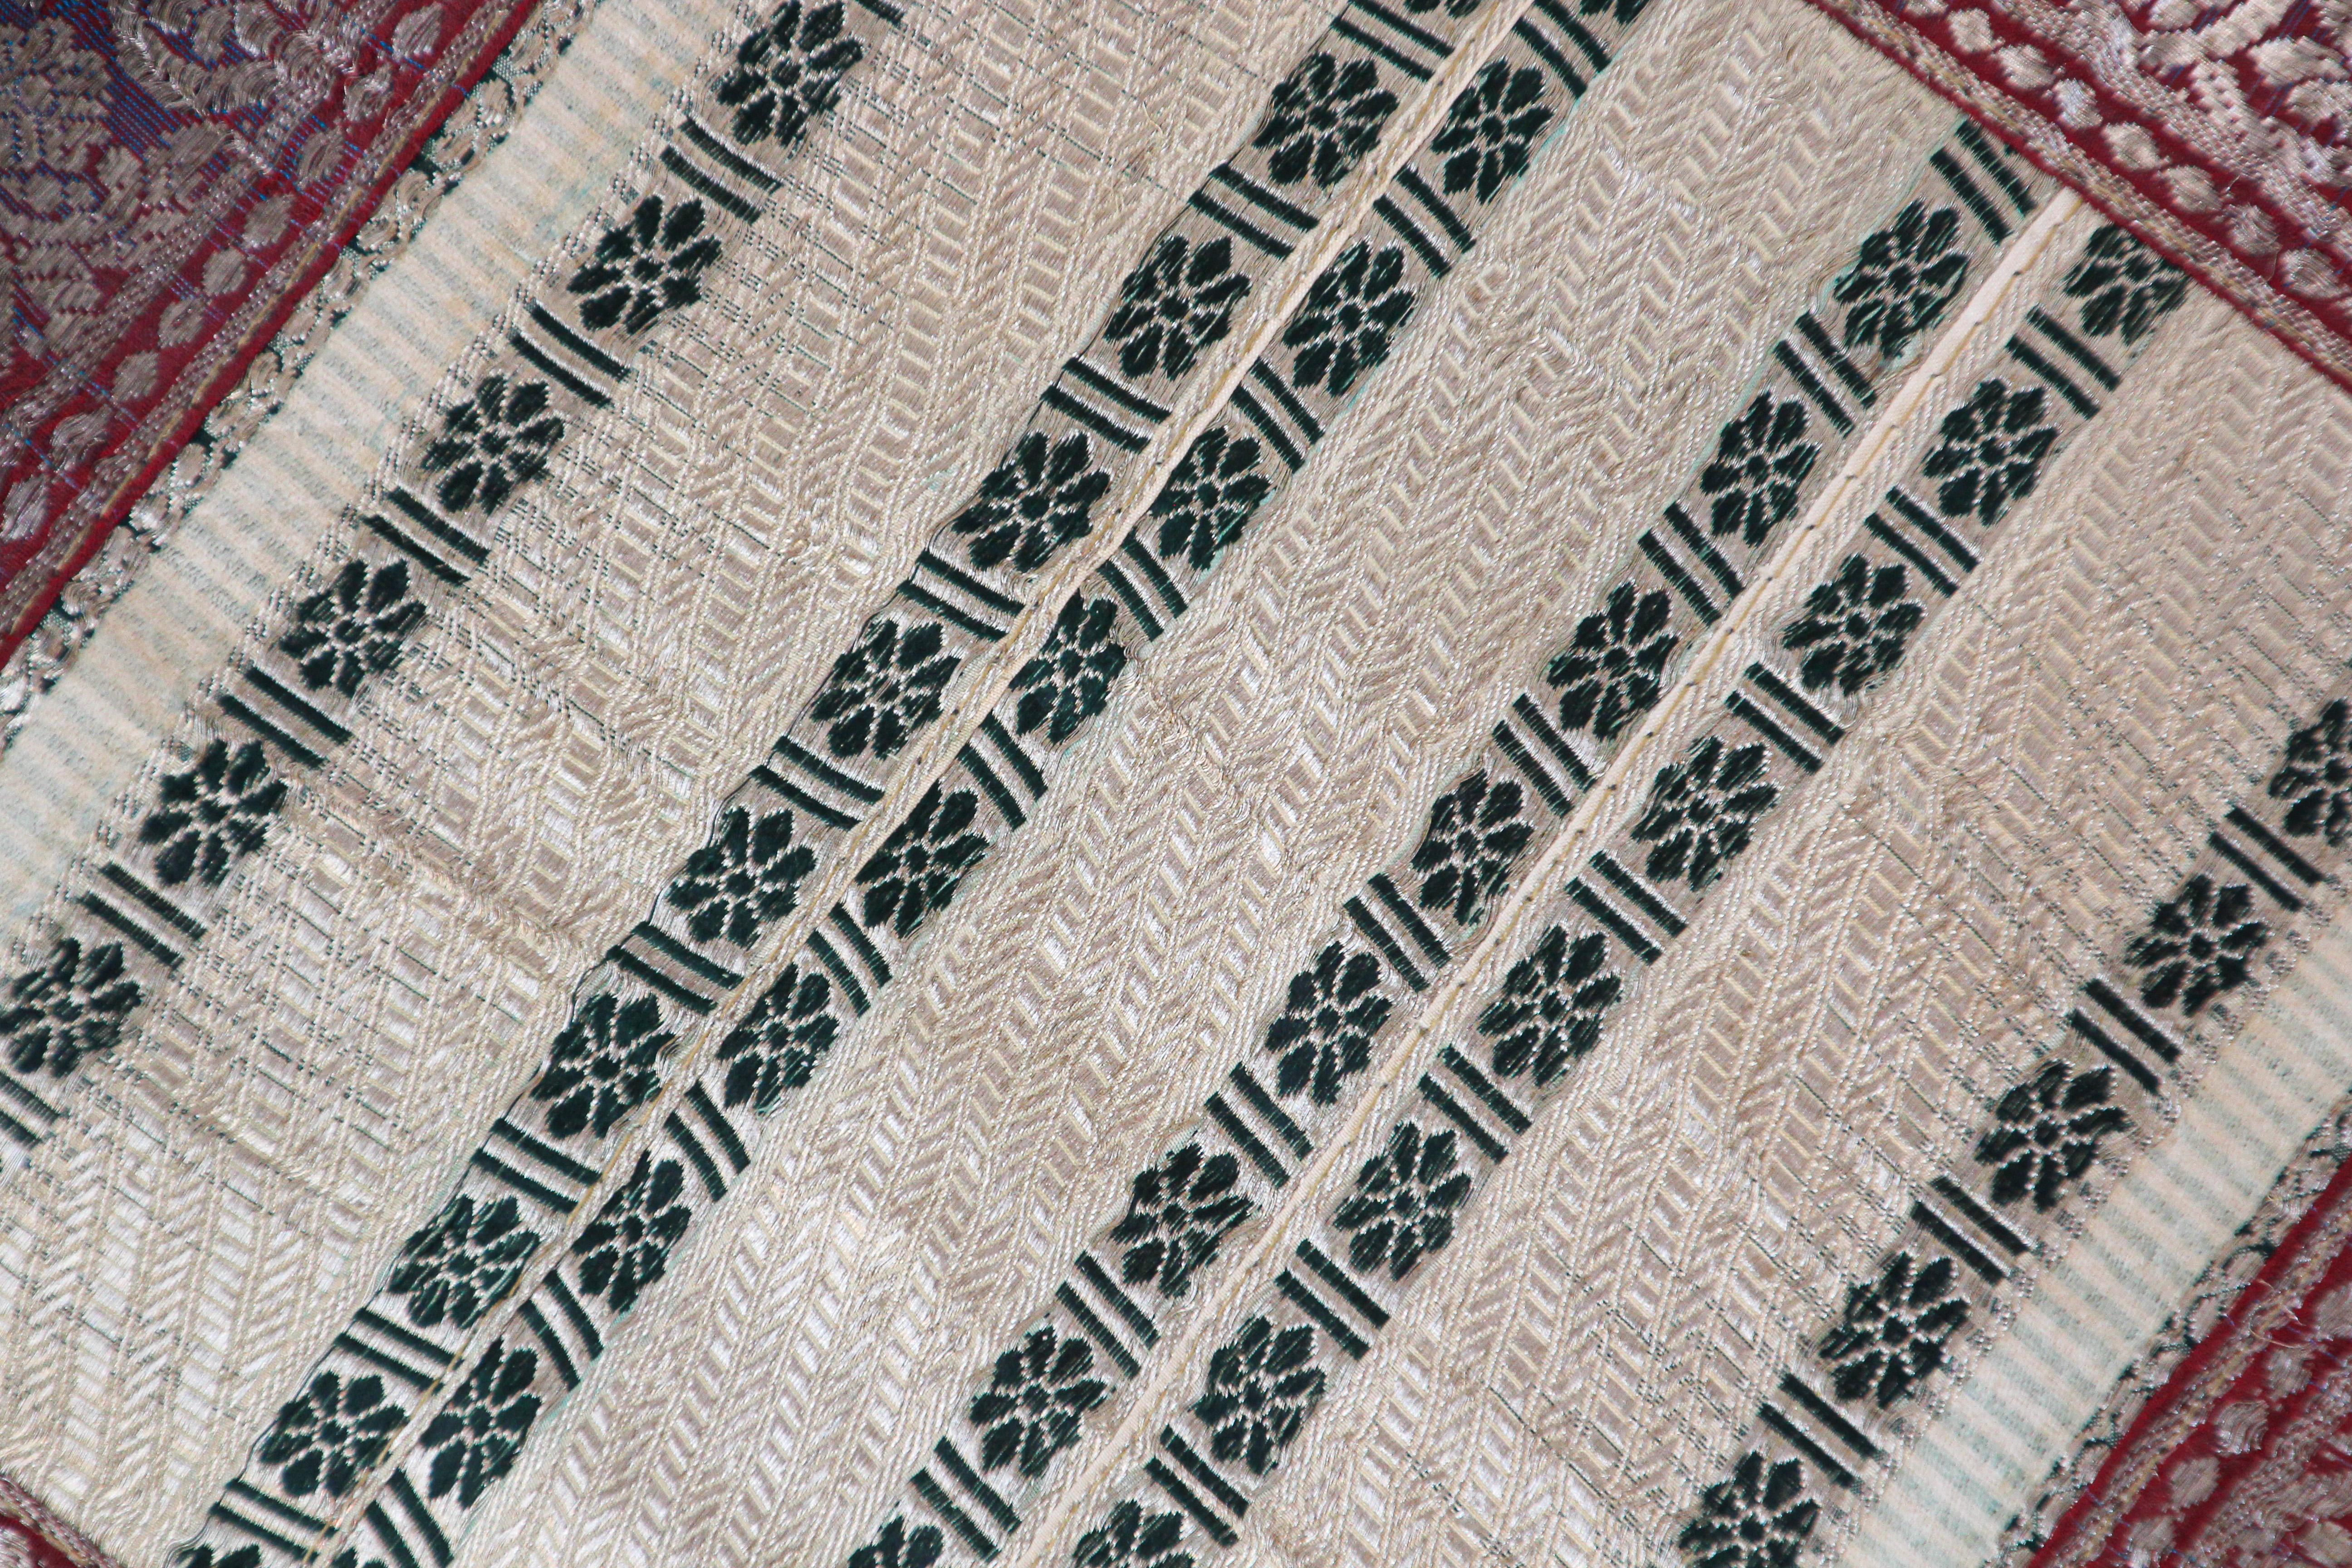 Indian Decorative Trow Pillow Made from Vintage Sari Borders, India For Sale